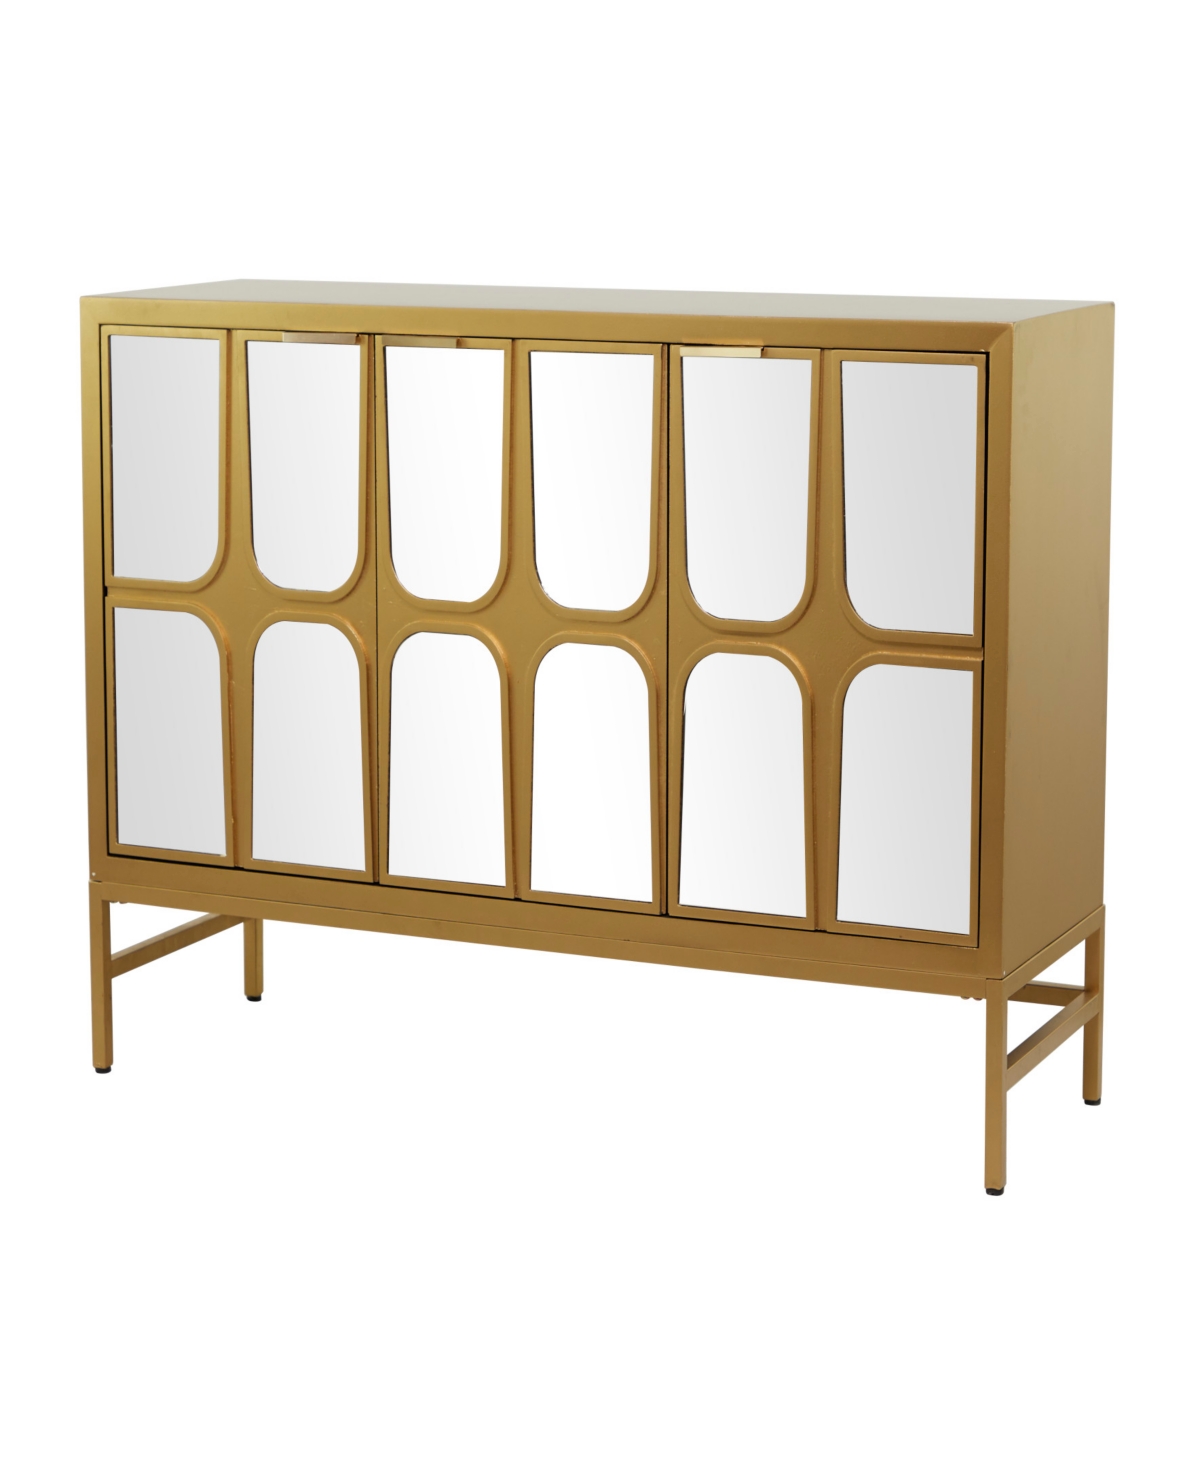 Rosemary Lane 32" Wood 1 Shelf And 3 Doors Cabinet With Mirrored Front In Gold